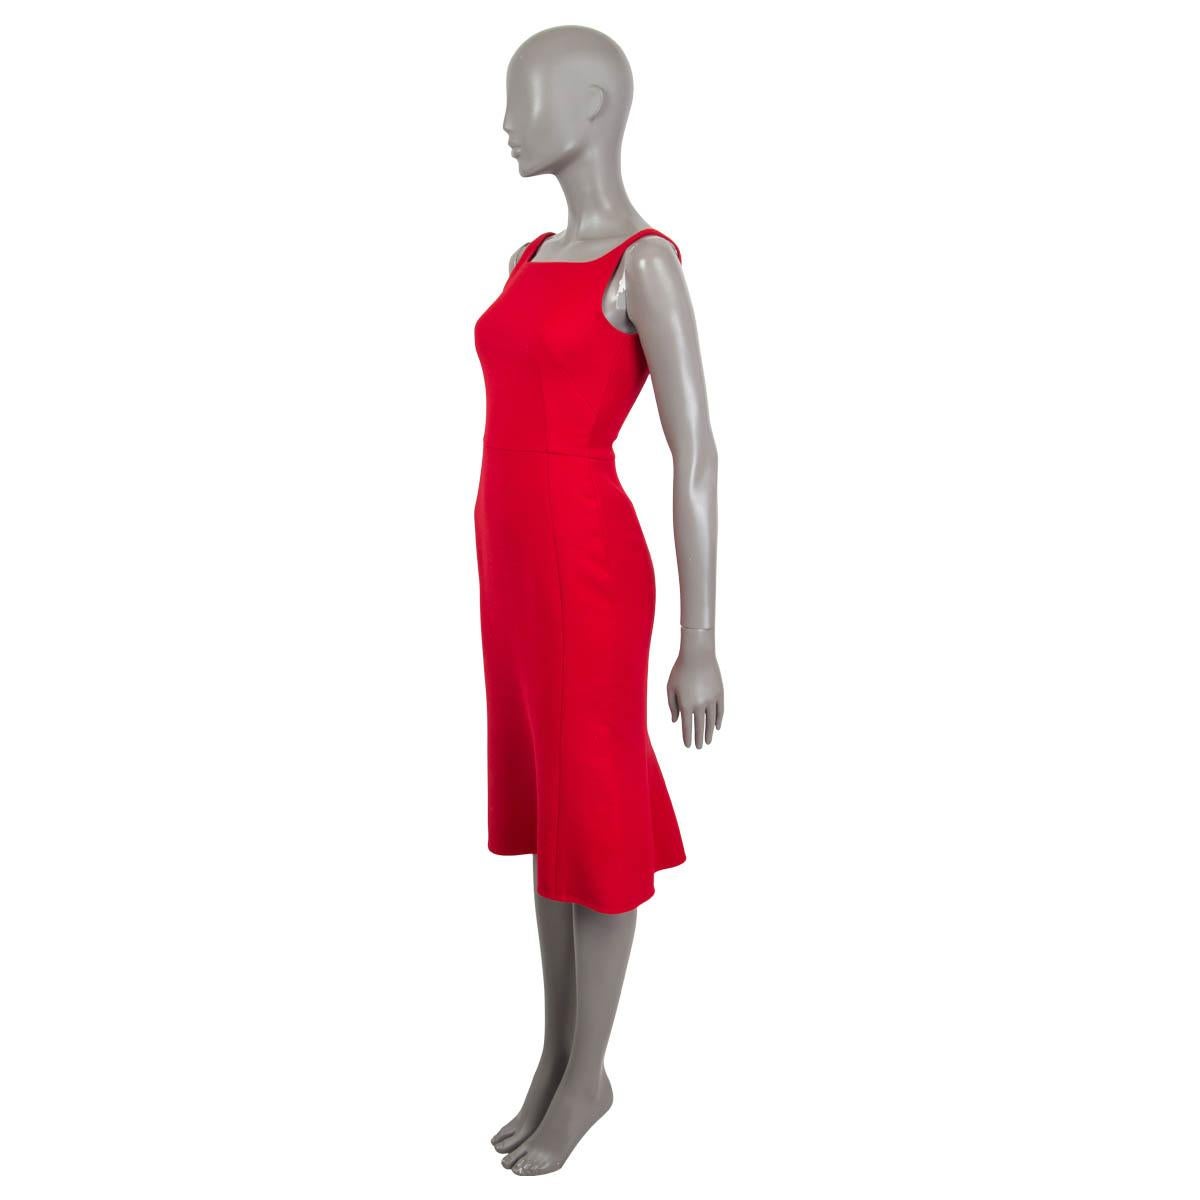 100% authentic Dolce & Gabbana flared knee-length dress in cherry red wool (100%). Opens with a concealed zipper and a hook at the back. Lined in cherry red silk (86%), cotton (8%), elastane (4%) and nylon (2%). Has been worn and is in excellent